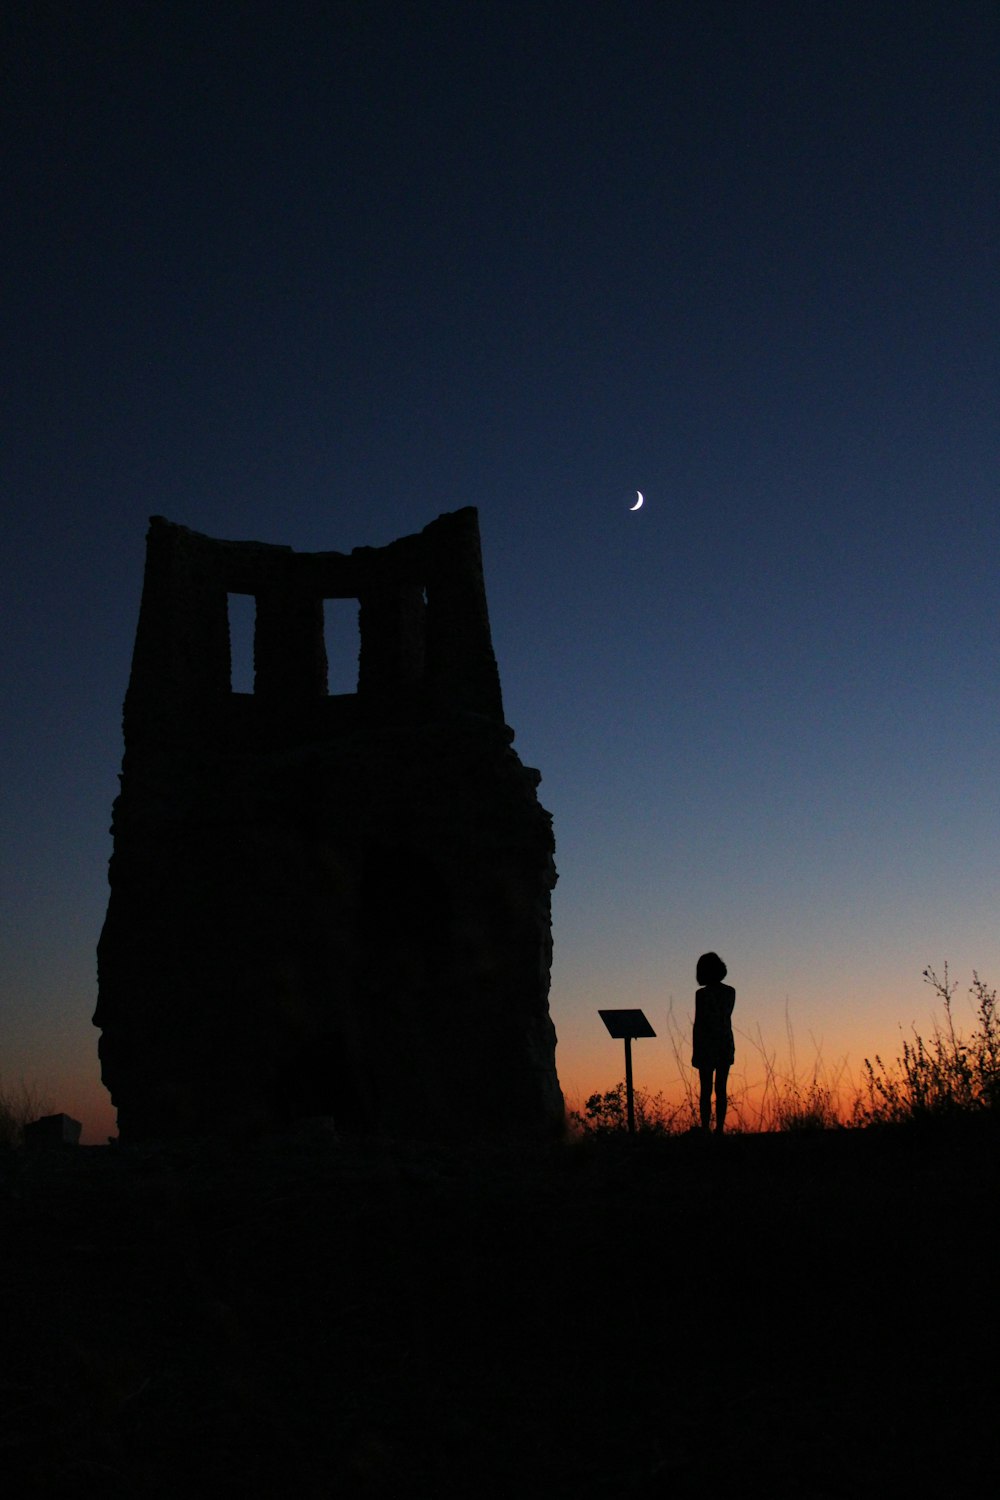 silhouette of people standing near rock formation during night time